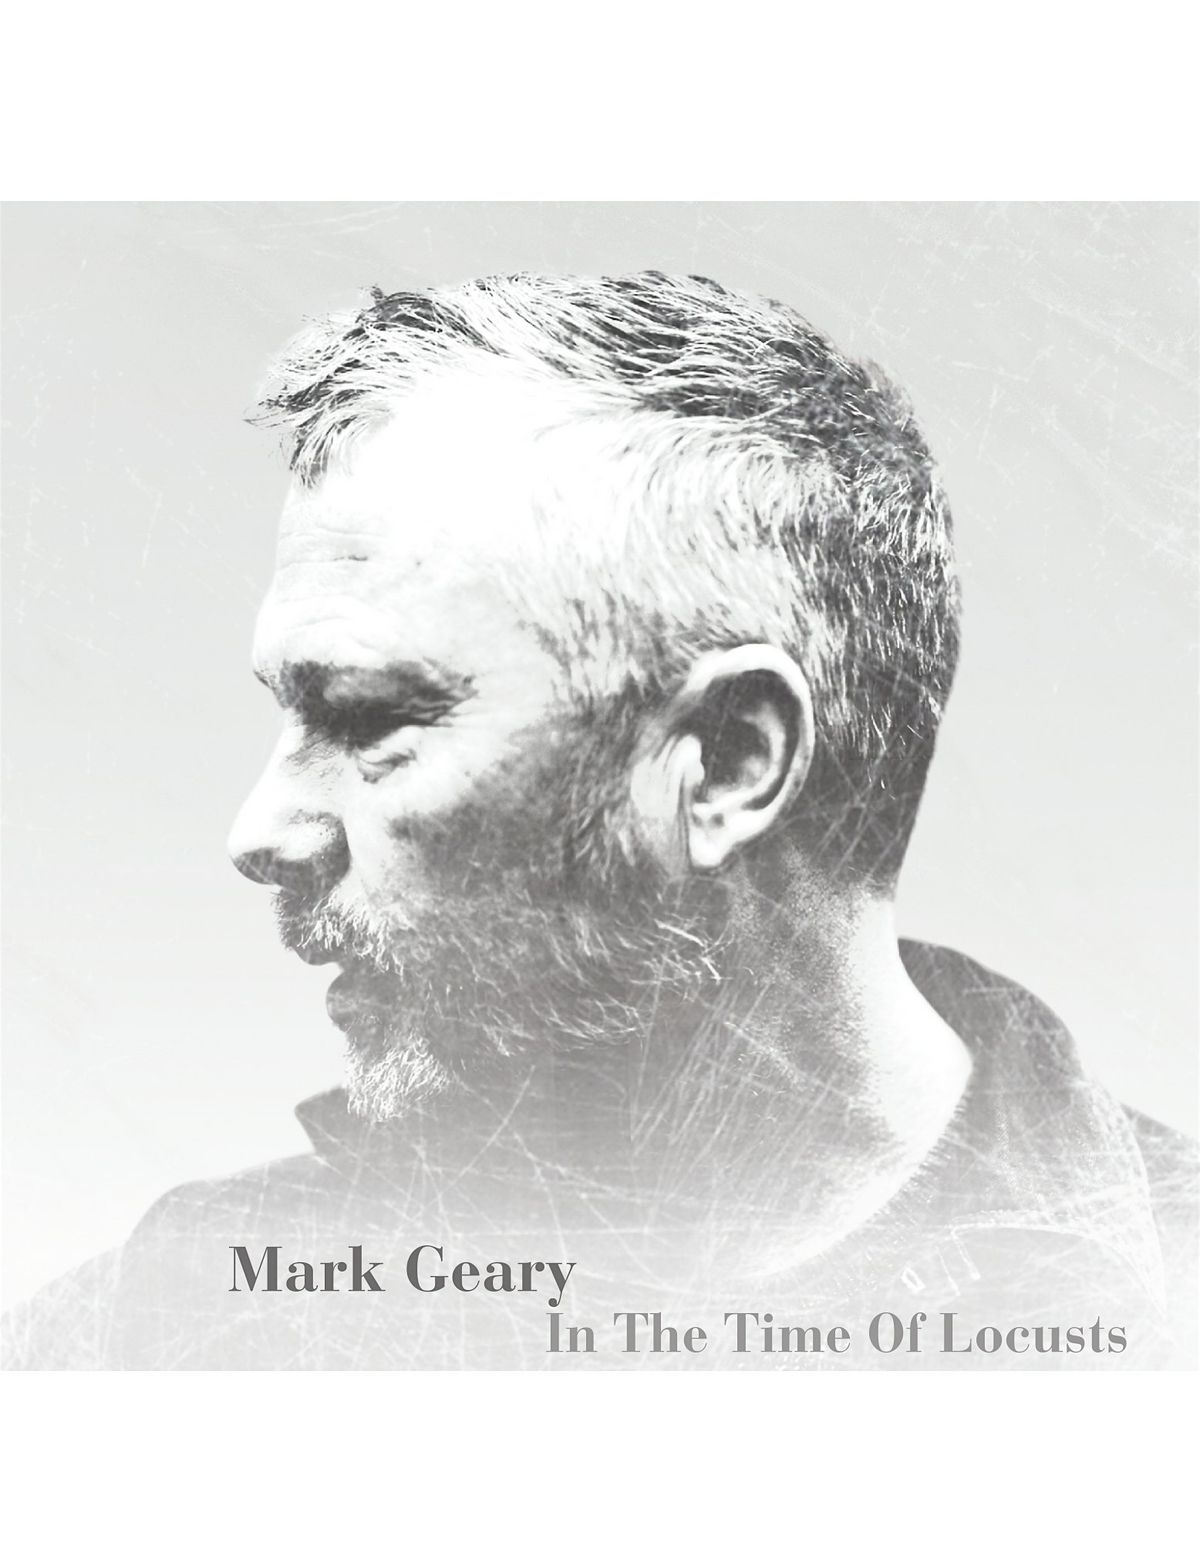 Mark Geary: In The Time of Locusts